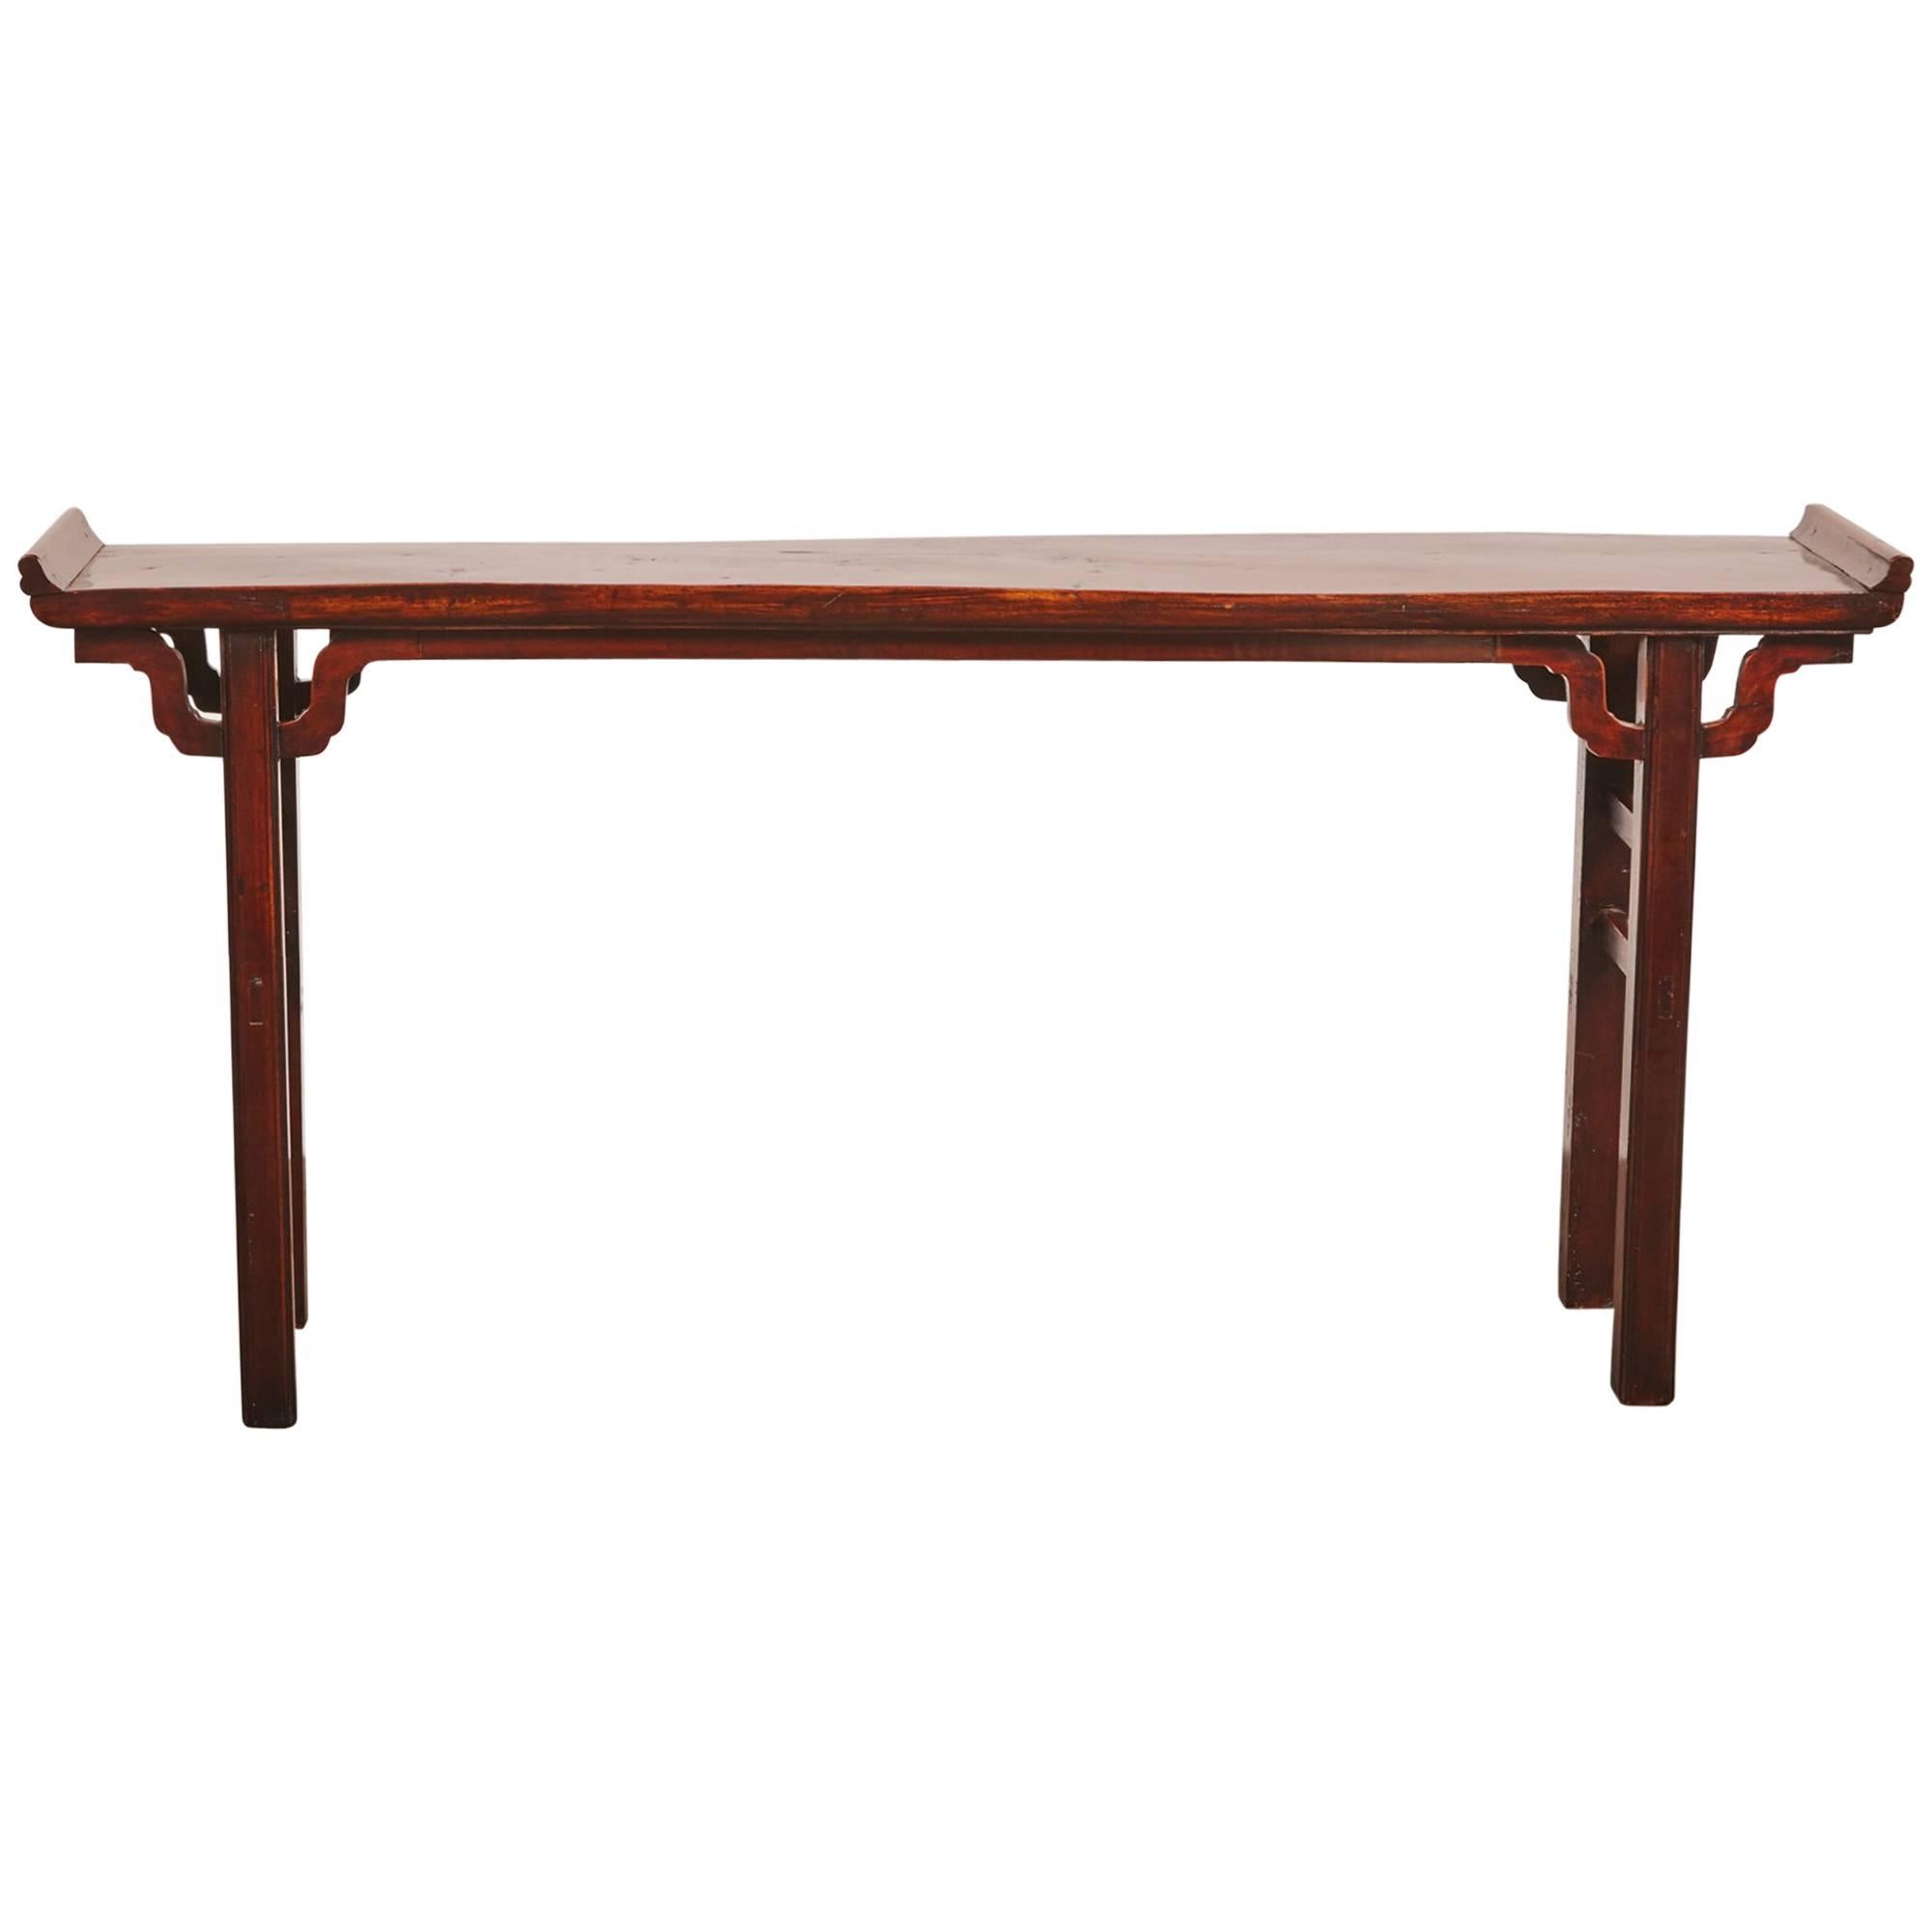 Rare 18th Century Chinese Qing Style Walnut Alter Table